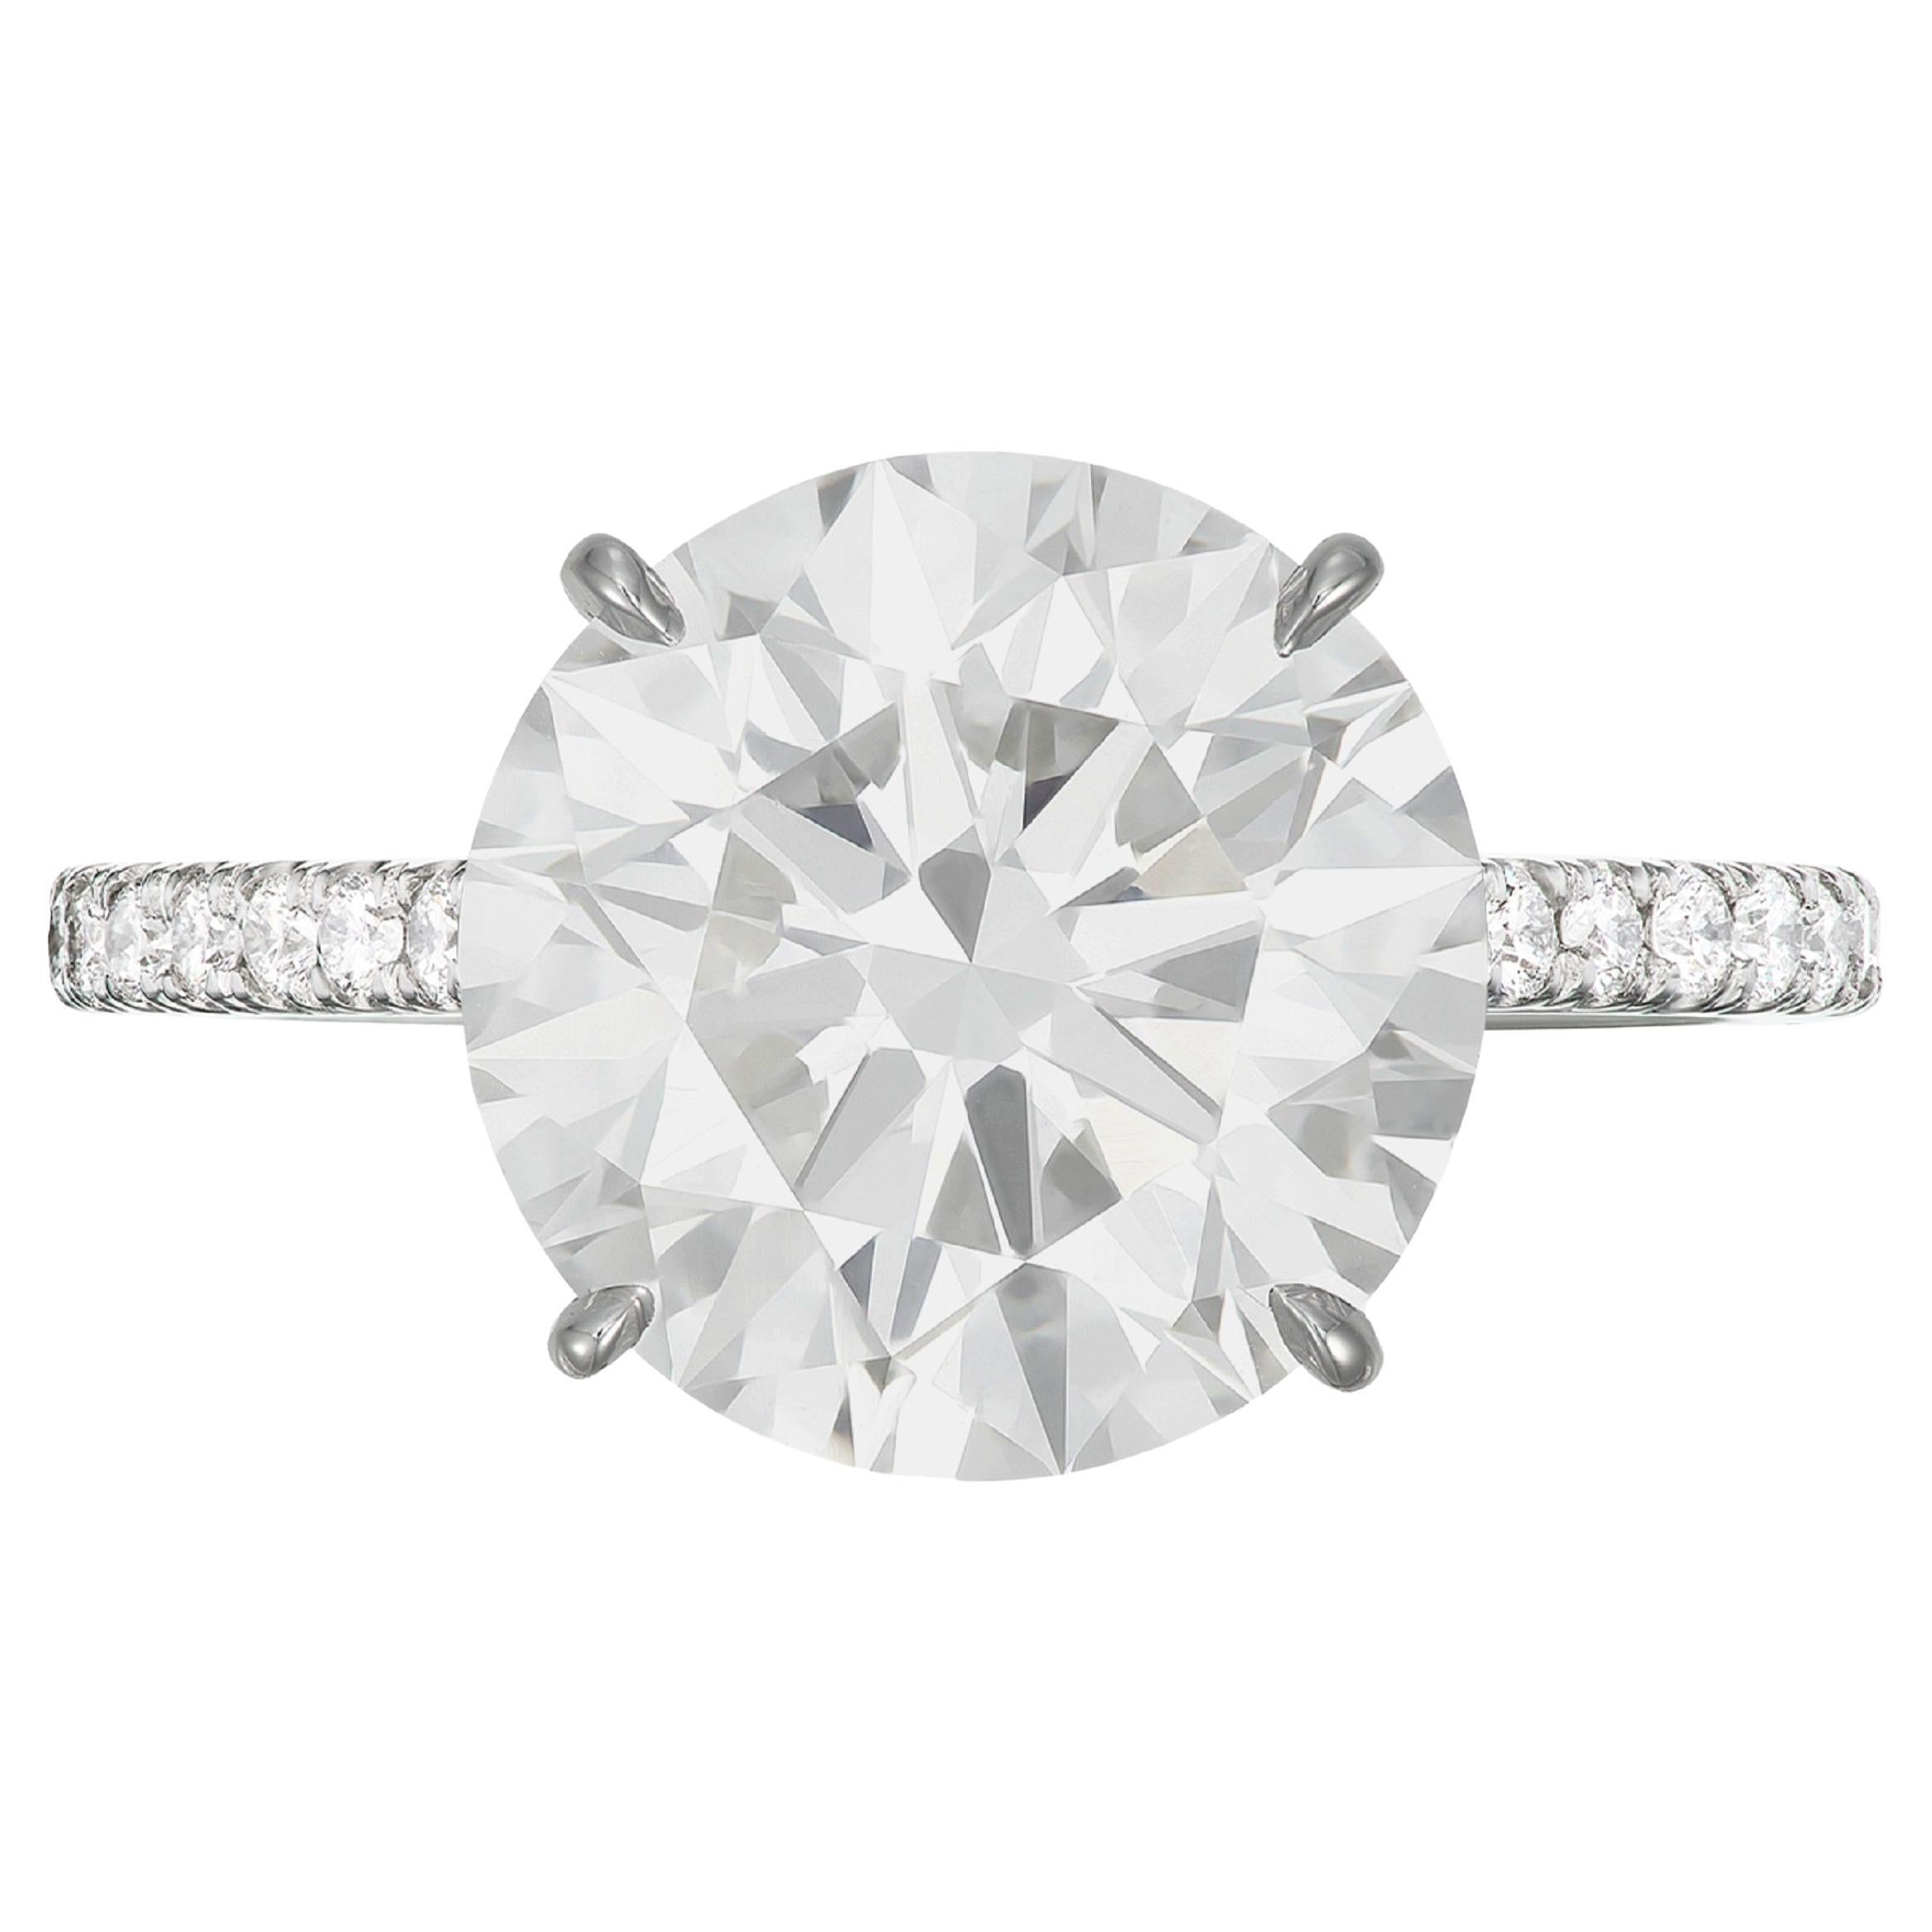 An exquisite investment grade 3.01 carat round brilliant cut diamond set with a micropave of round diamonds in solid platinum
3 excellent cut
F Color
Internally Flawless Clarity
Fluorescence: None

a truly magnificent jewel